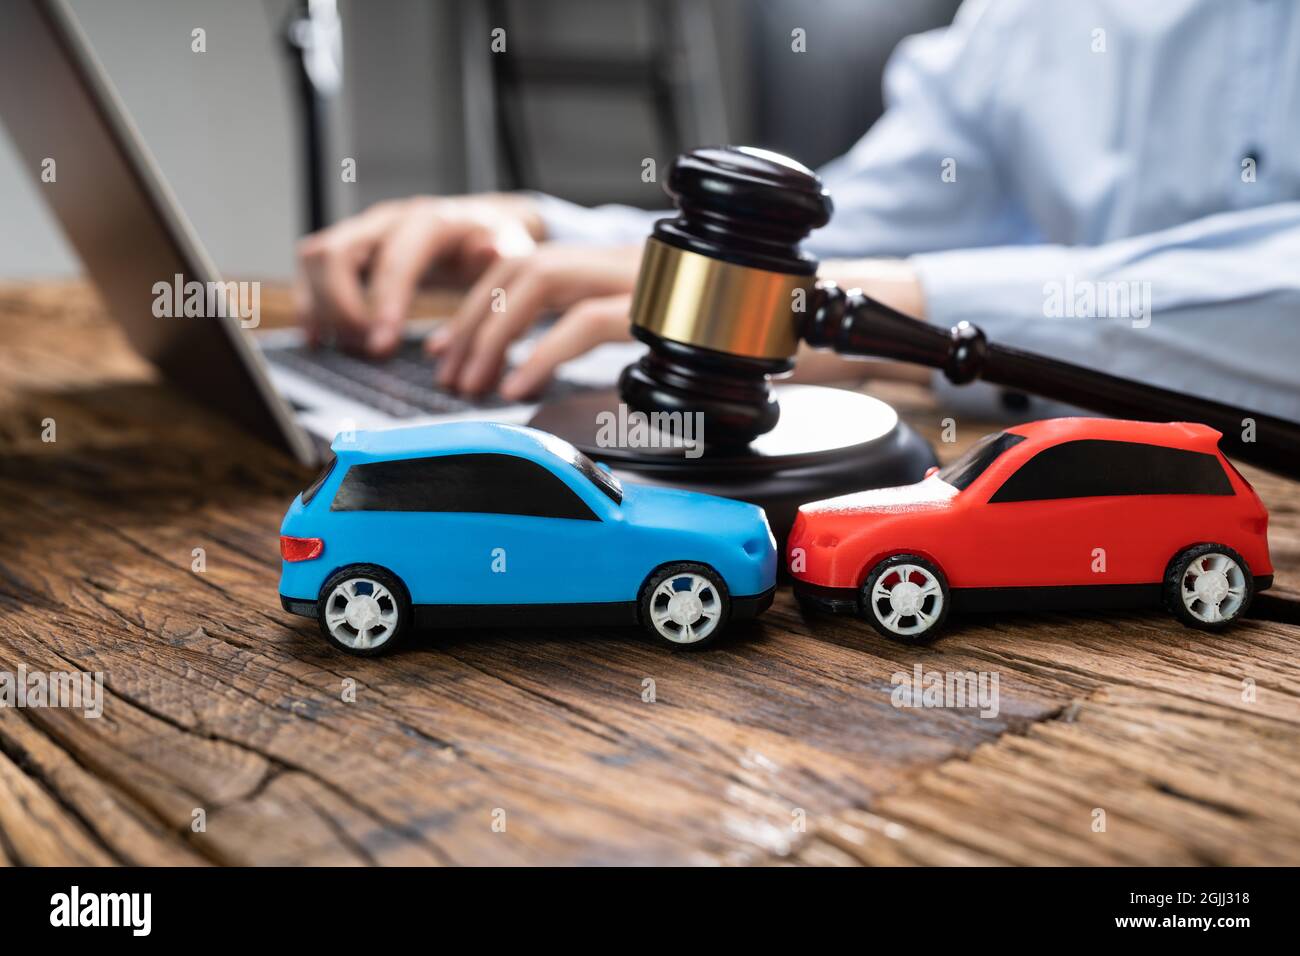 Liability Insurance Lawyer And Car Accident Concept Stock Photo